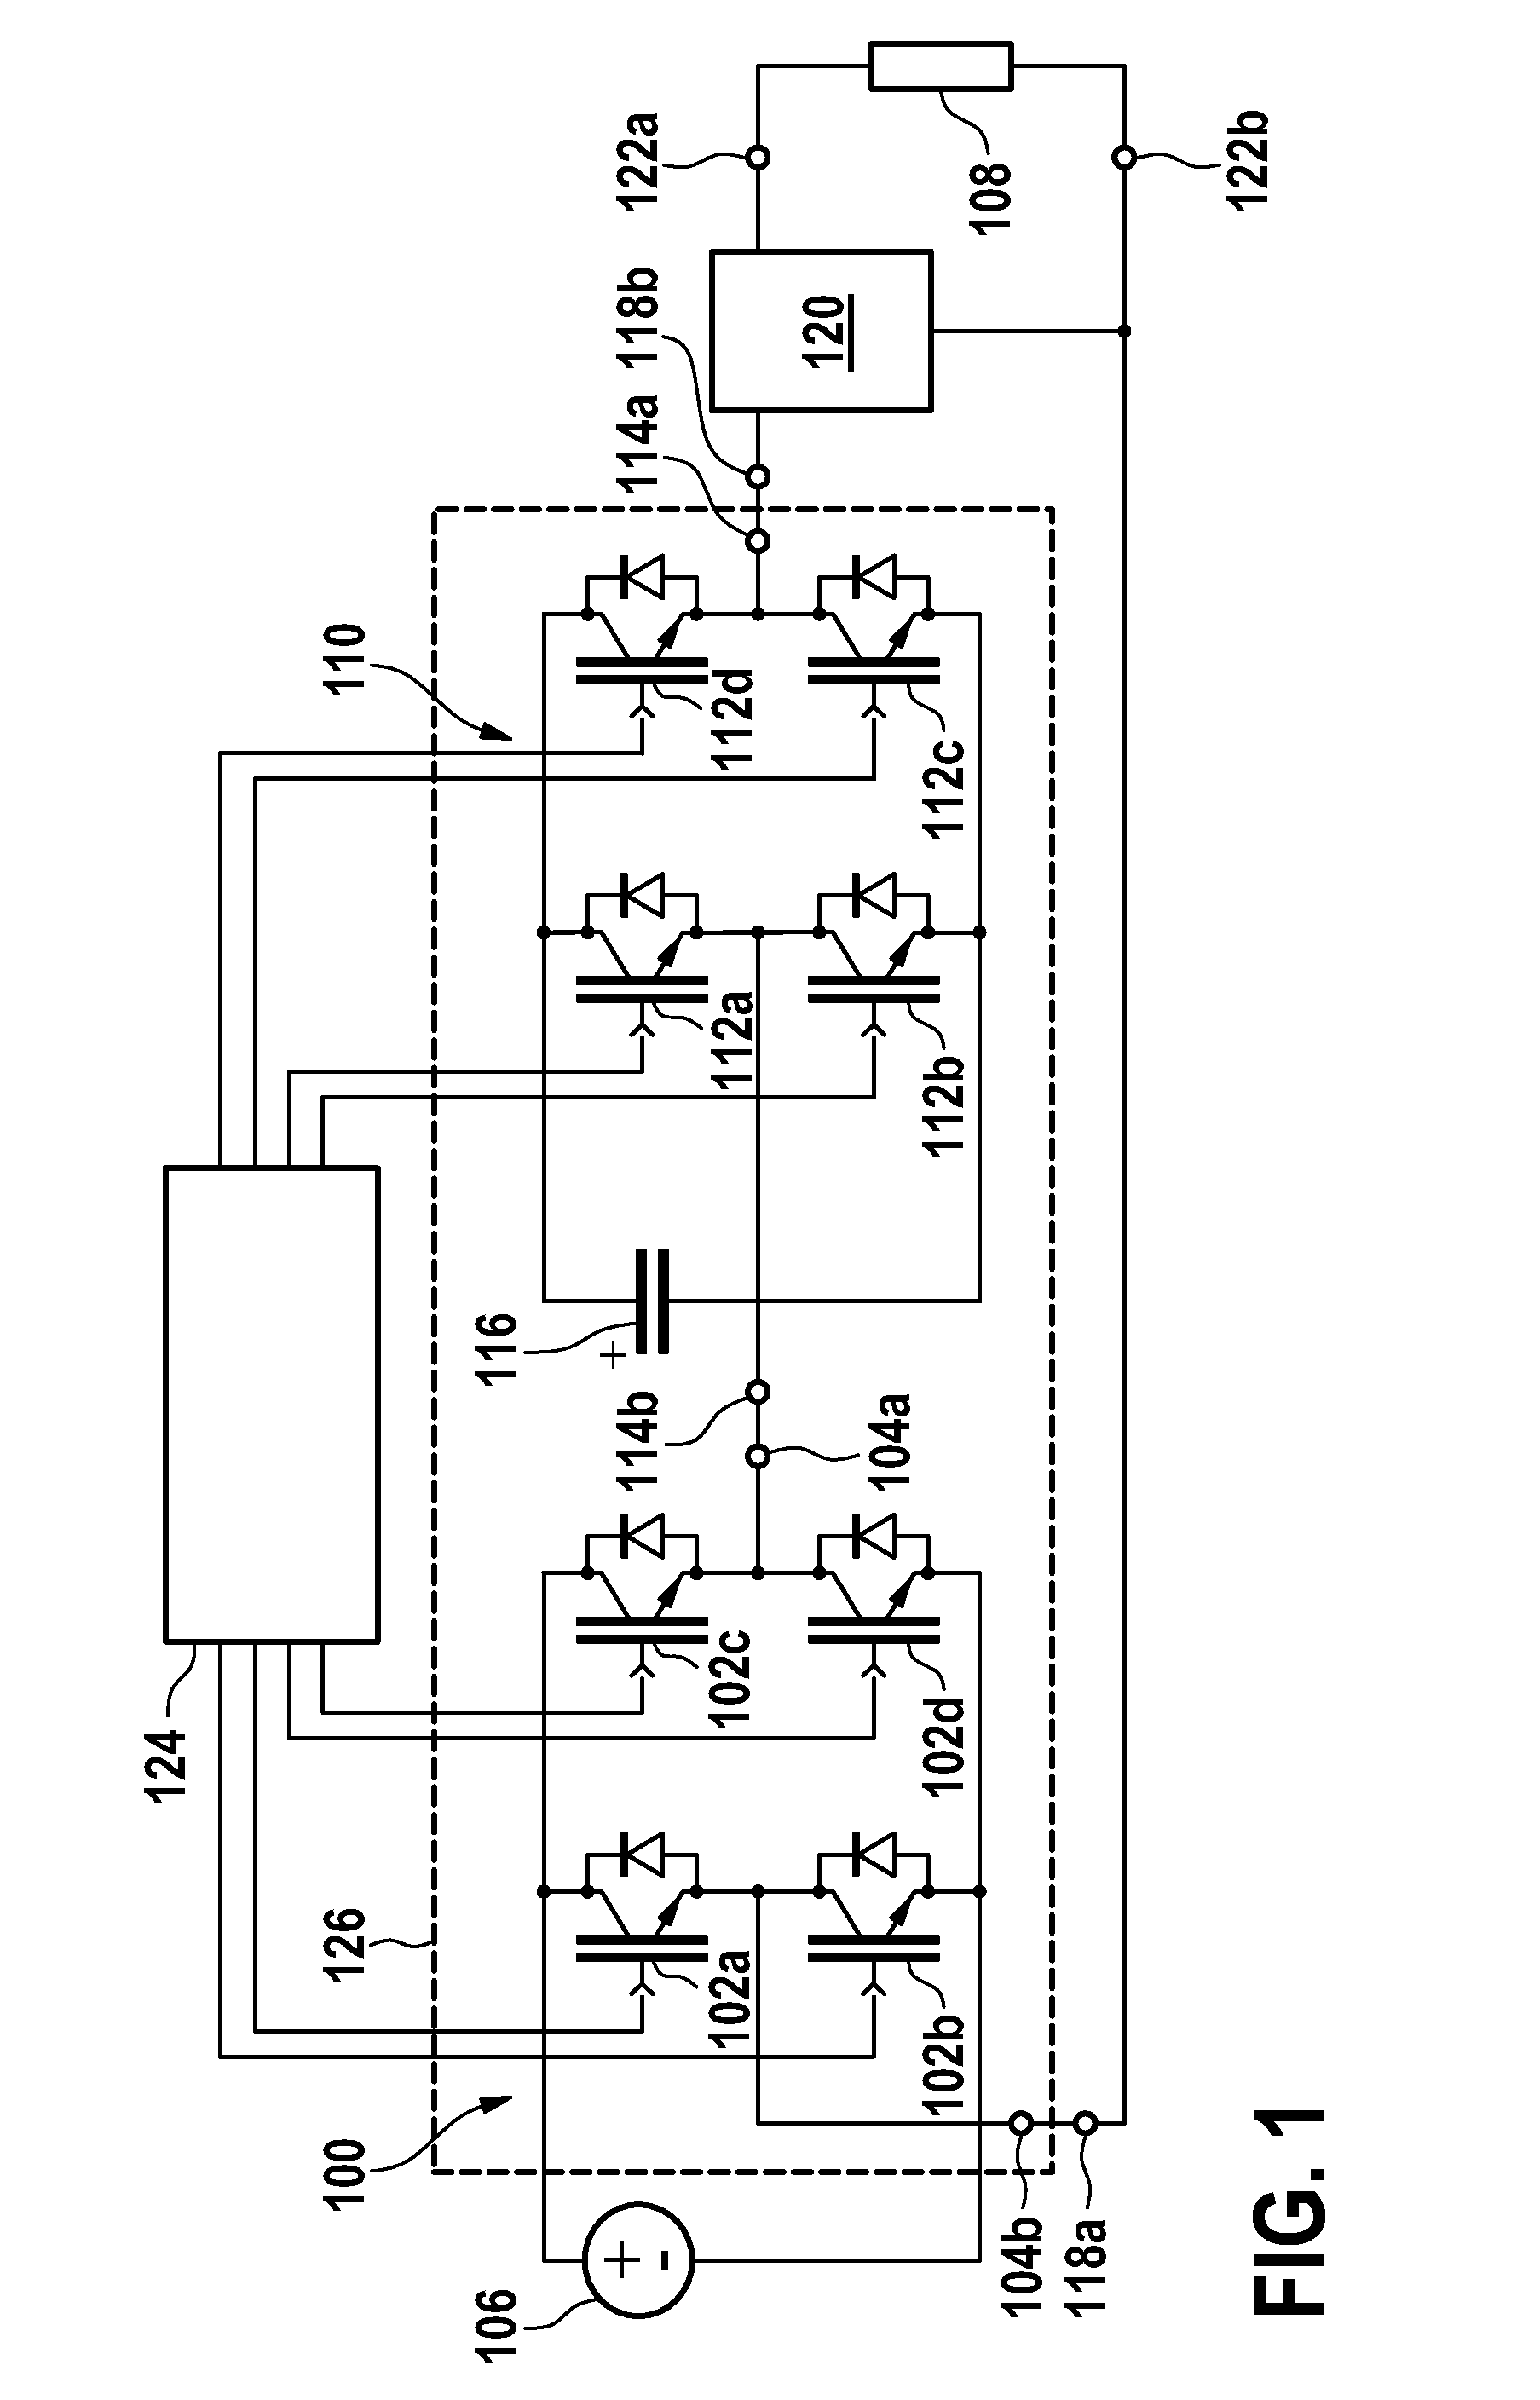 Power supply, method, and computer program product for supplying electrical power to a load